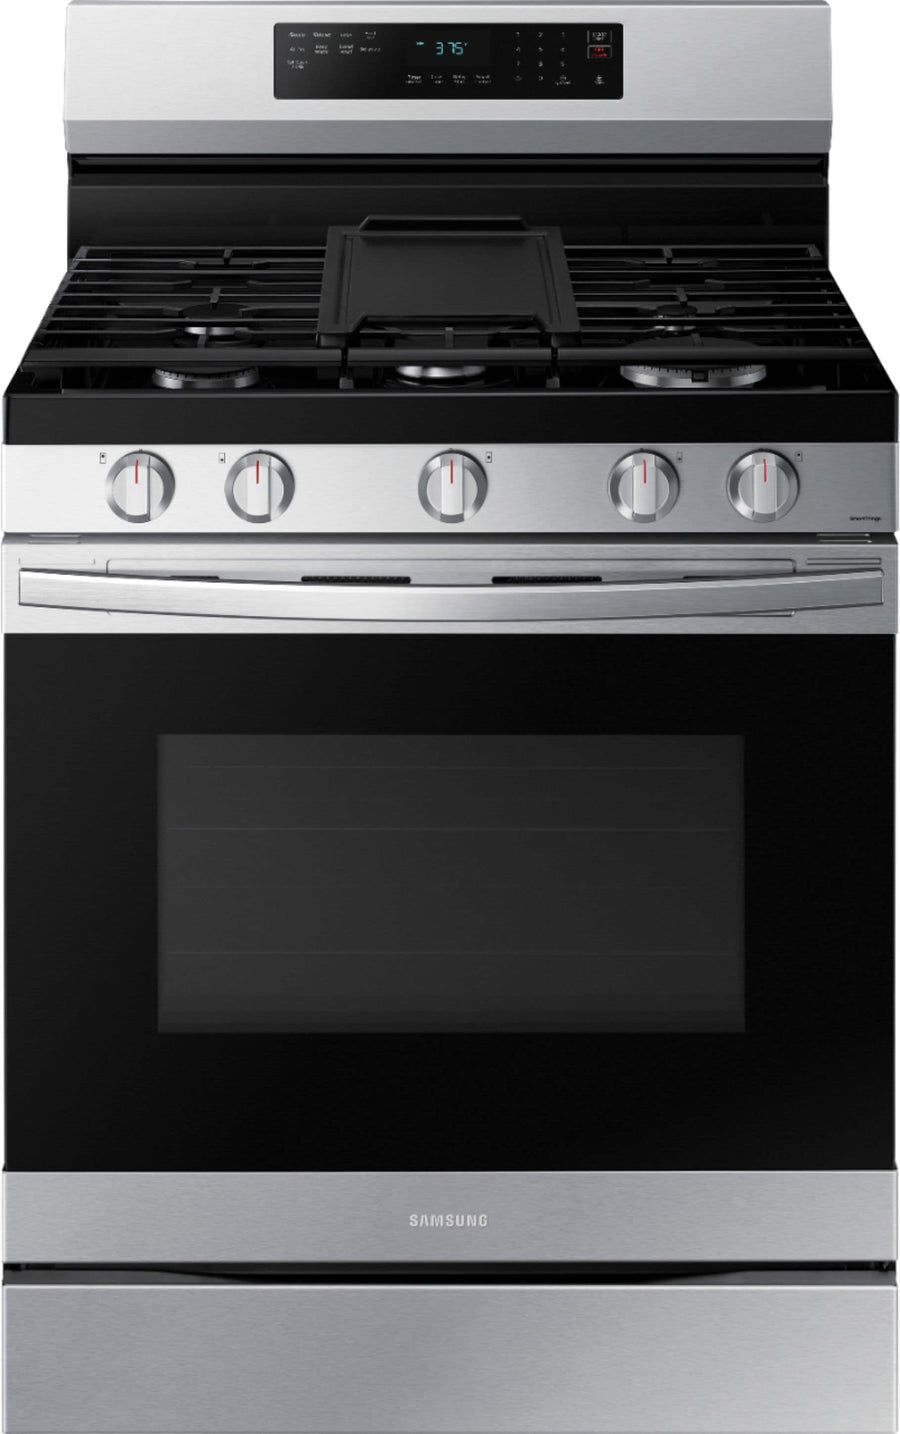 Samsung - 6.0 cu. ft. Freestanding Gas Range with WiFi, No-Preheat Air Fry & Convection - Stainless steel_0